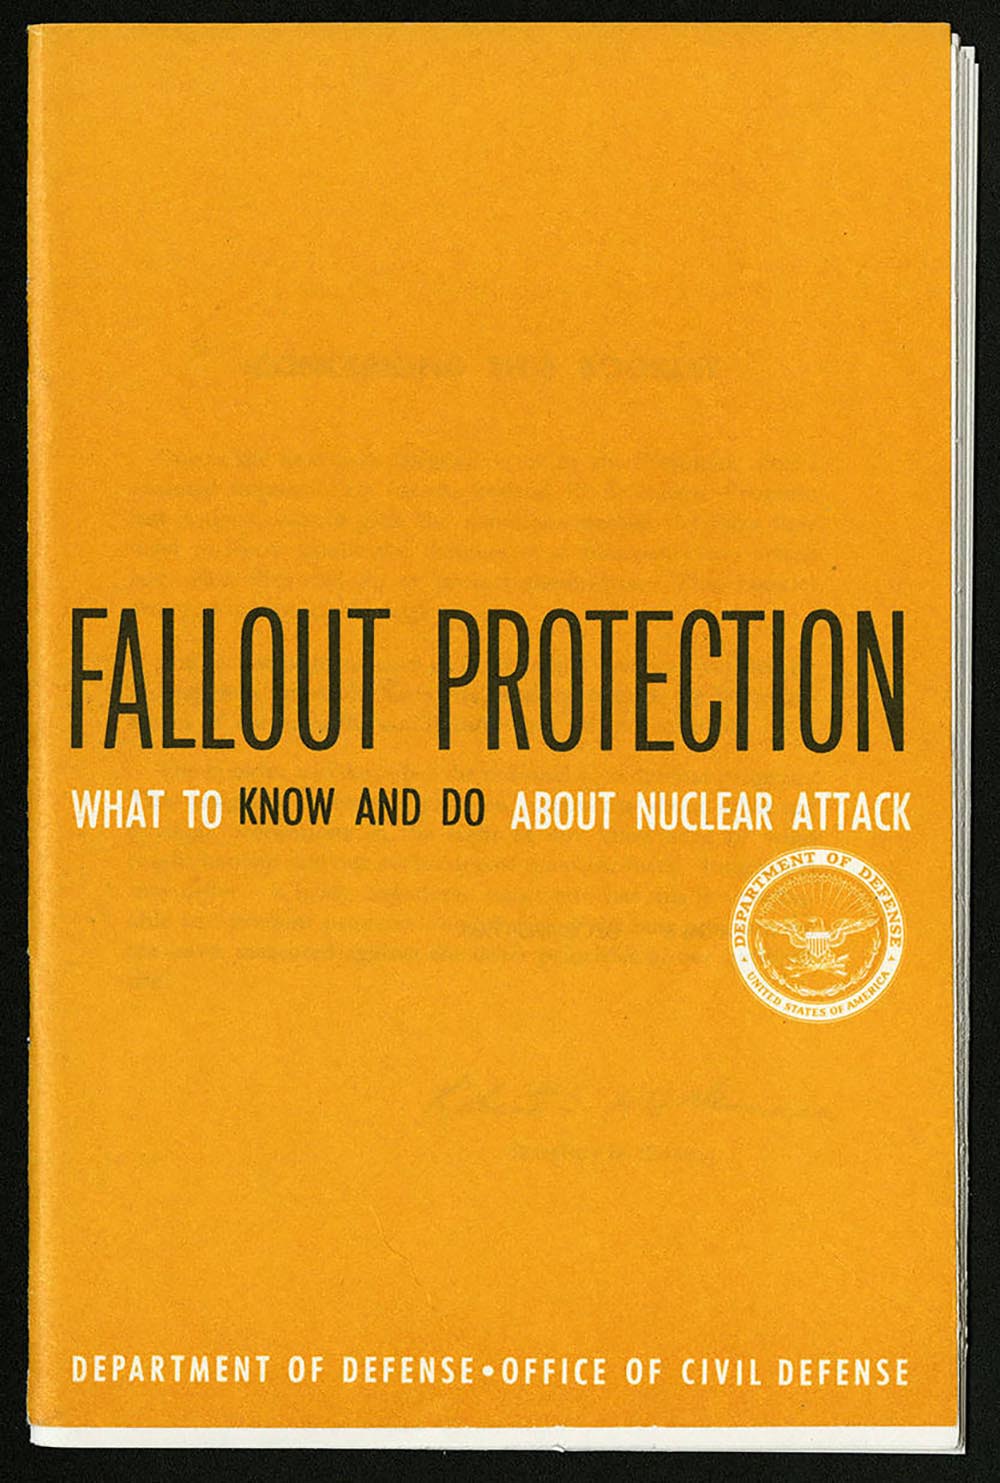 Publication issued by the Office of Civil Defense to educate Americans about the threat of nuclear attack during the Cold War